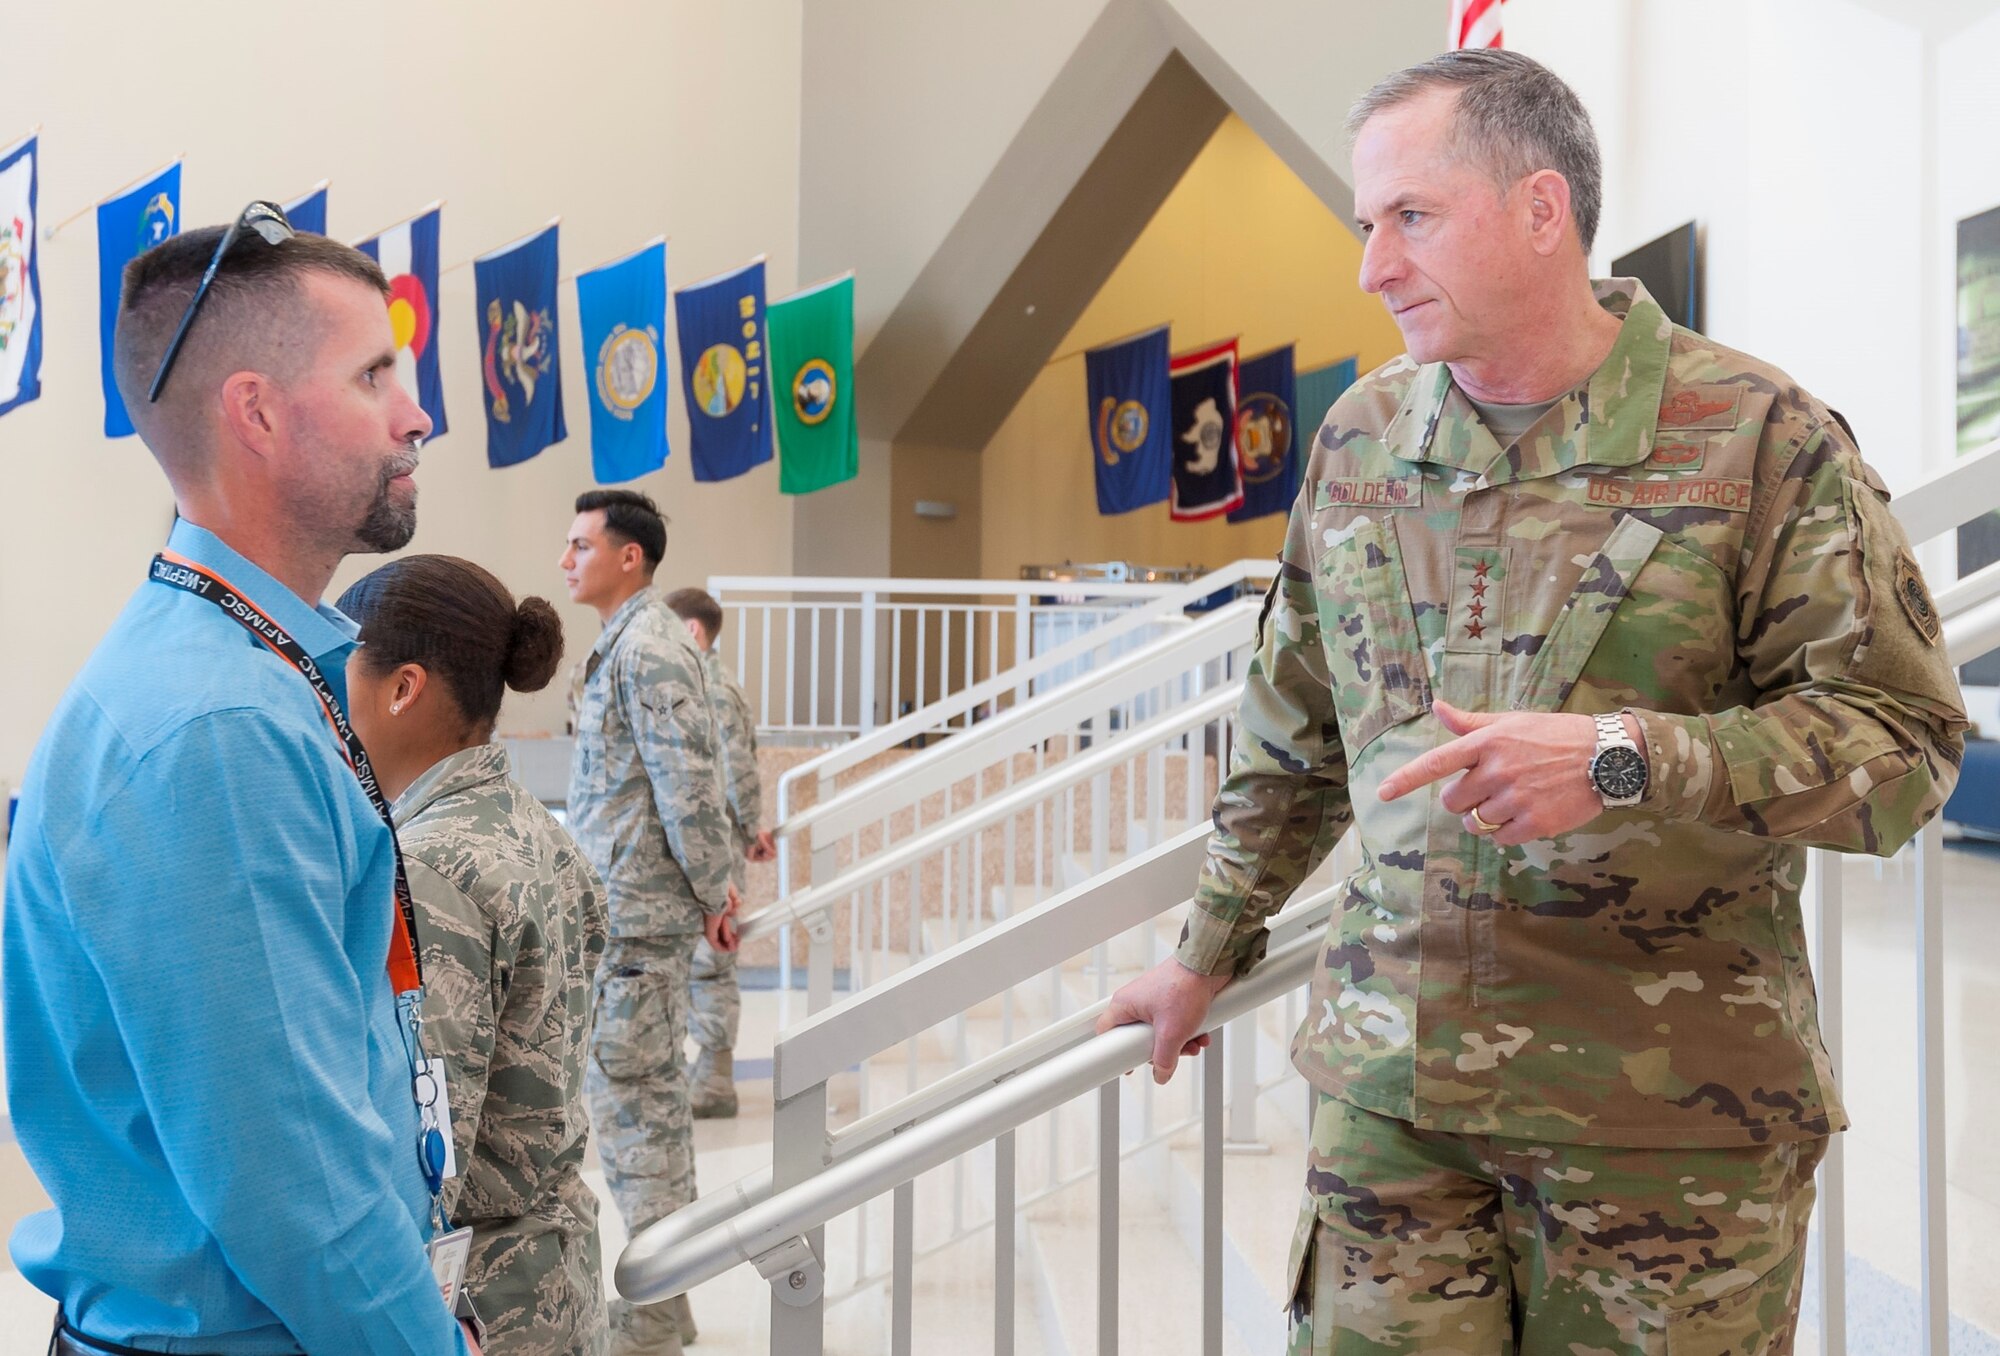 Air Force Chief of Staff Gen. David L. Goldfein talks with Scott Lilley of the Air Force Installation and Mission Support Center Security Office, April 8, 2019, during a break between briefings at the Installation and Mission Support Weapons and Tactics Conference at Joint Base San Antonio-Lackland, Texas. Lilley is a wounded warrior and former security forces Airman.